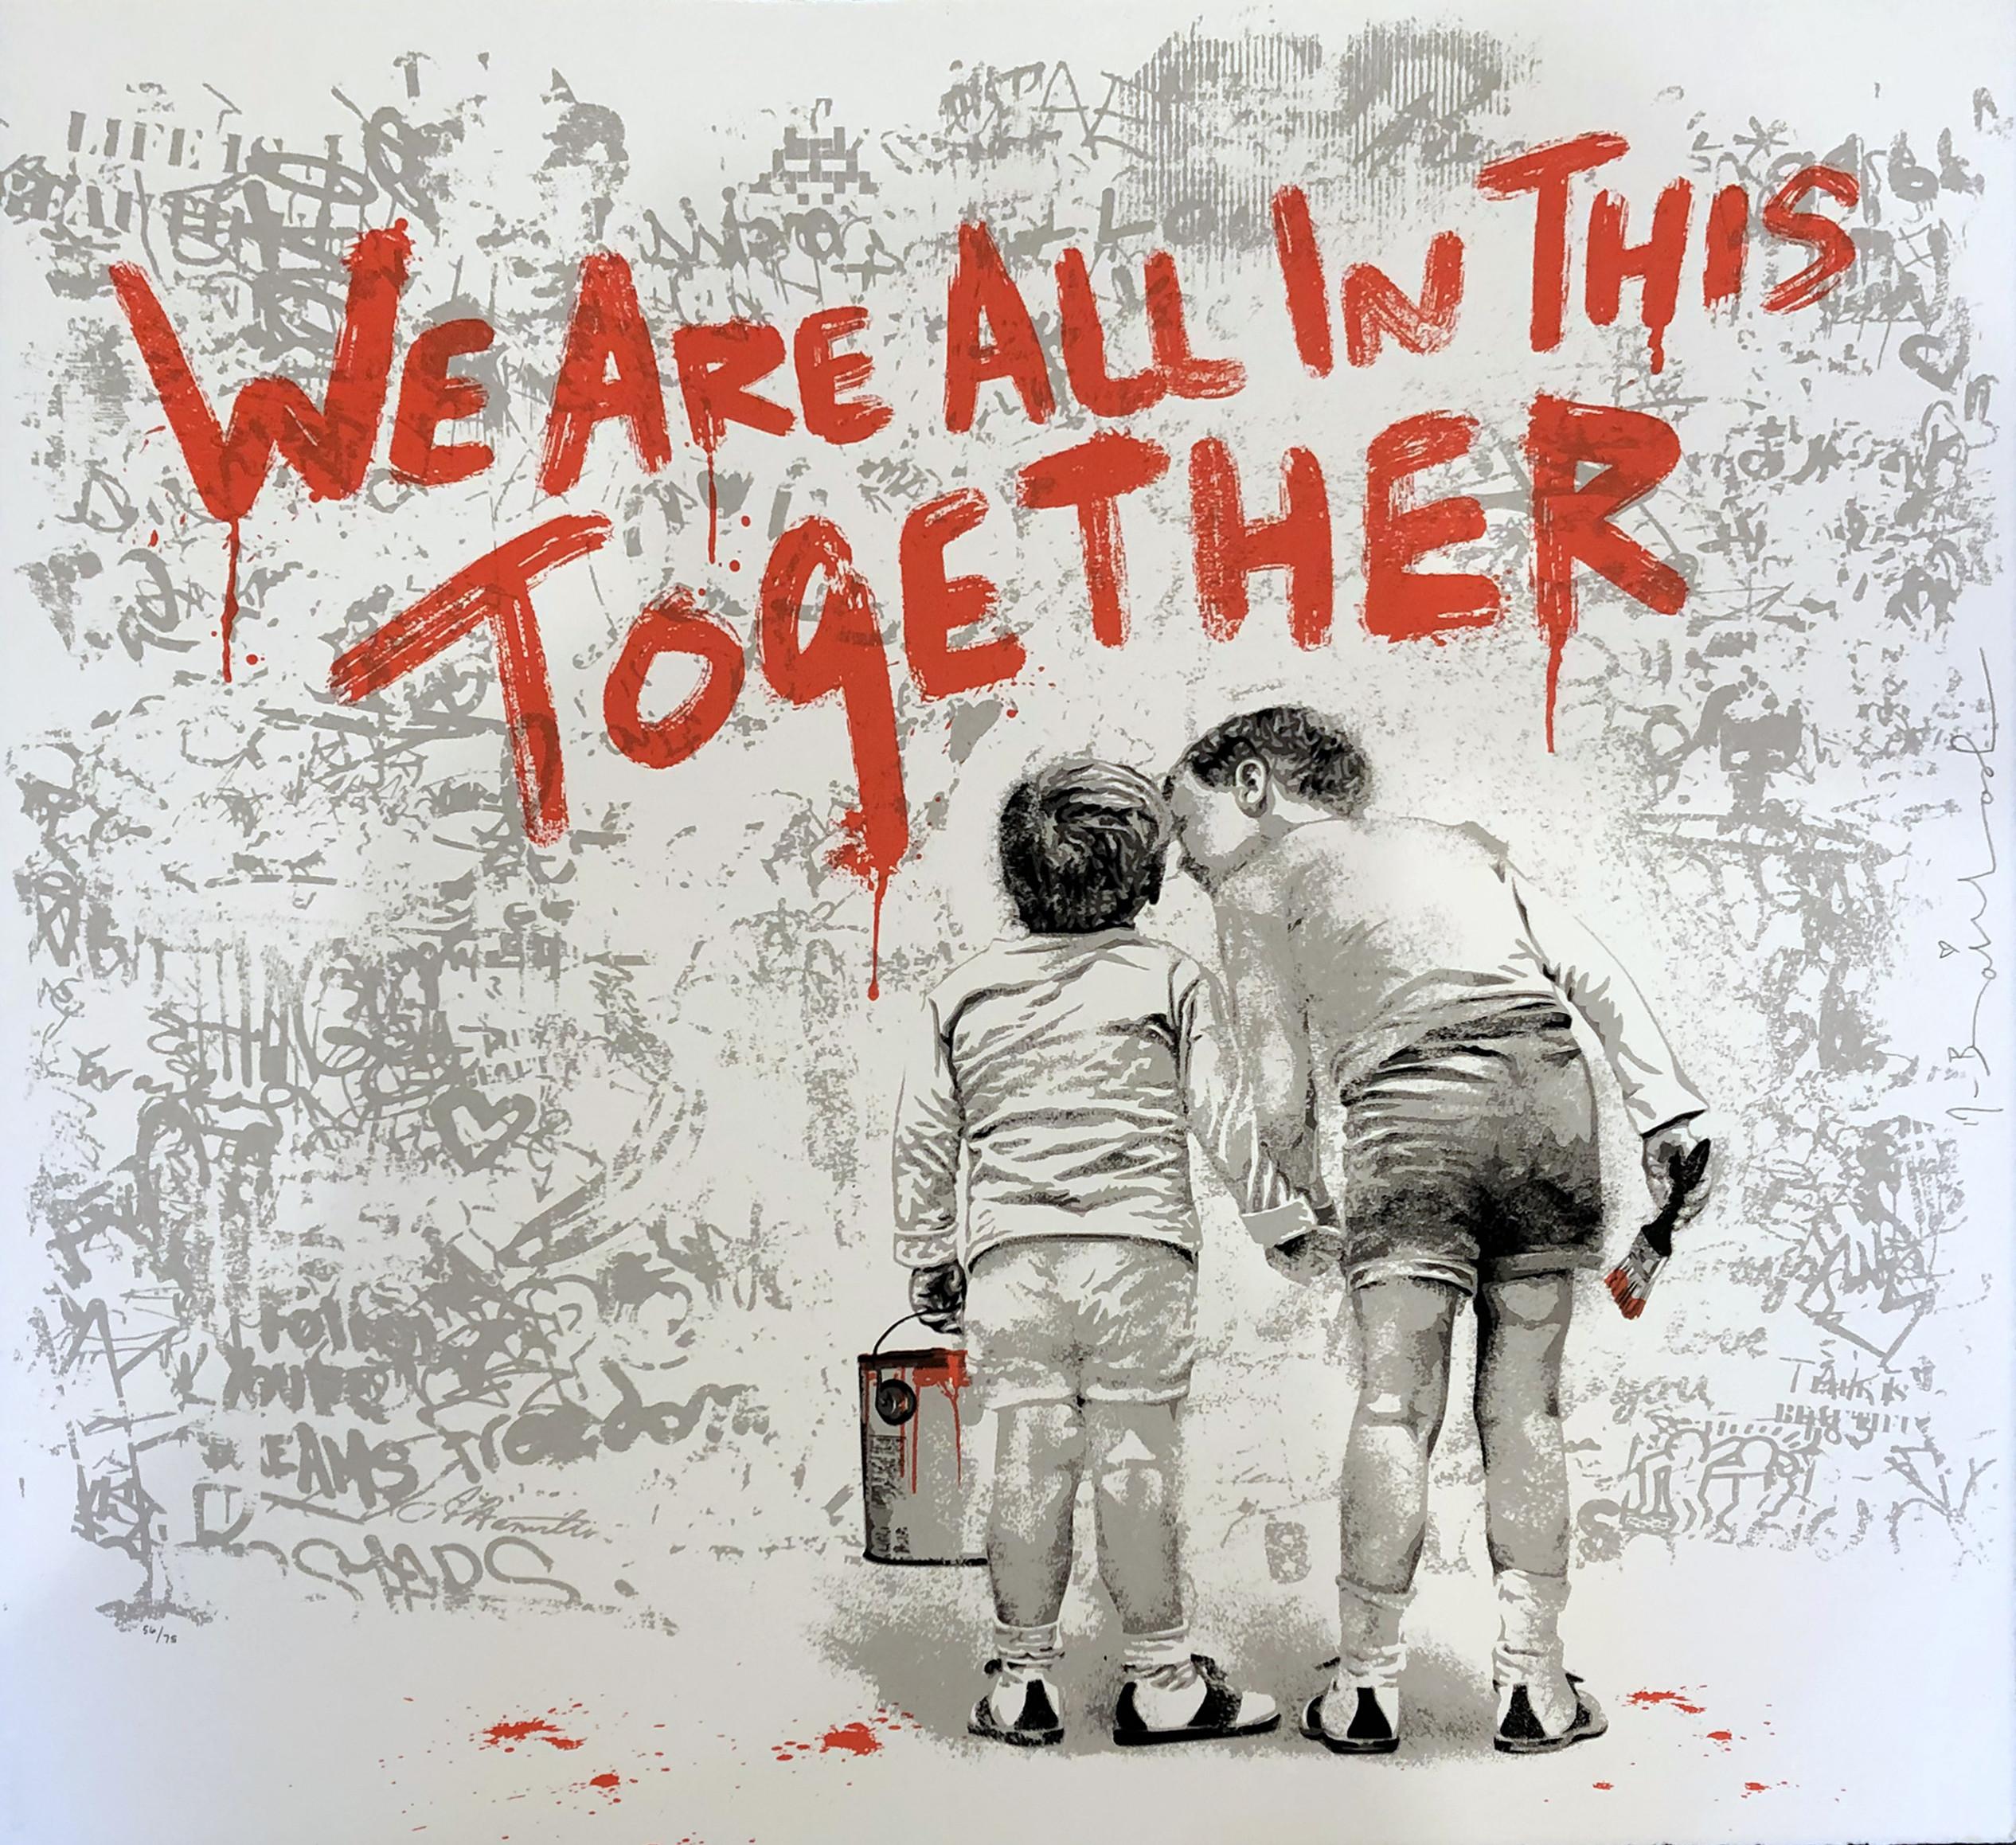 We Are All In This Together (Red) - Print by Mr. Brainwash